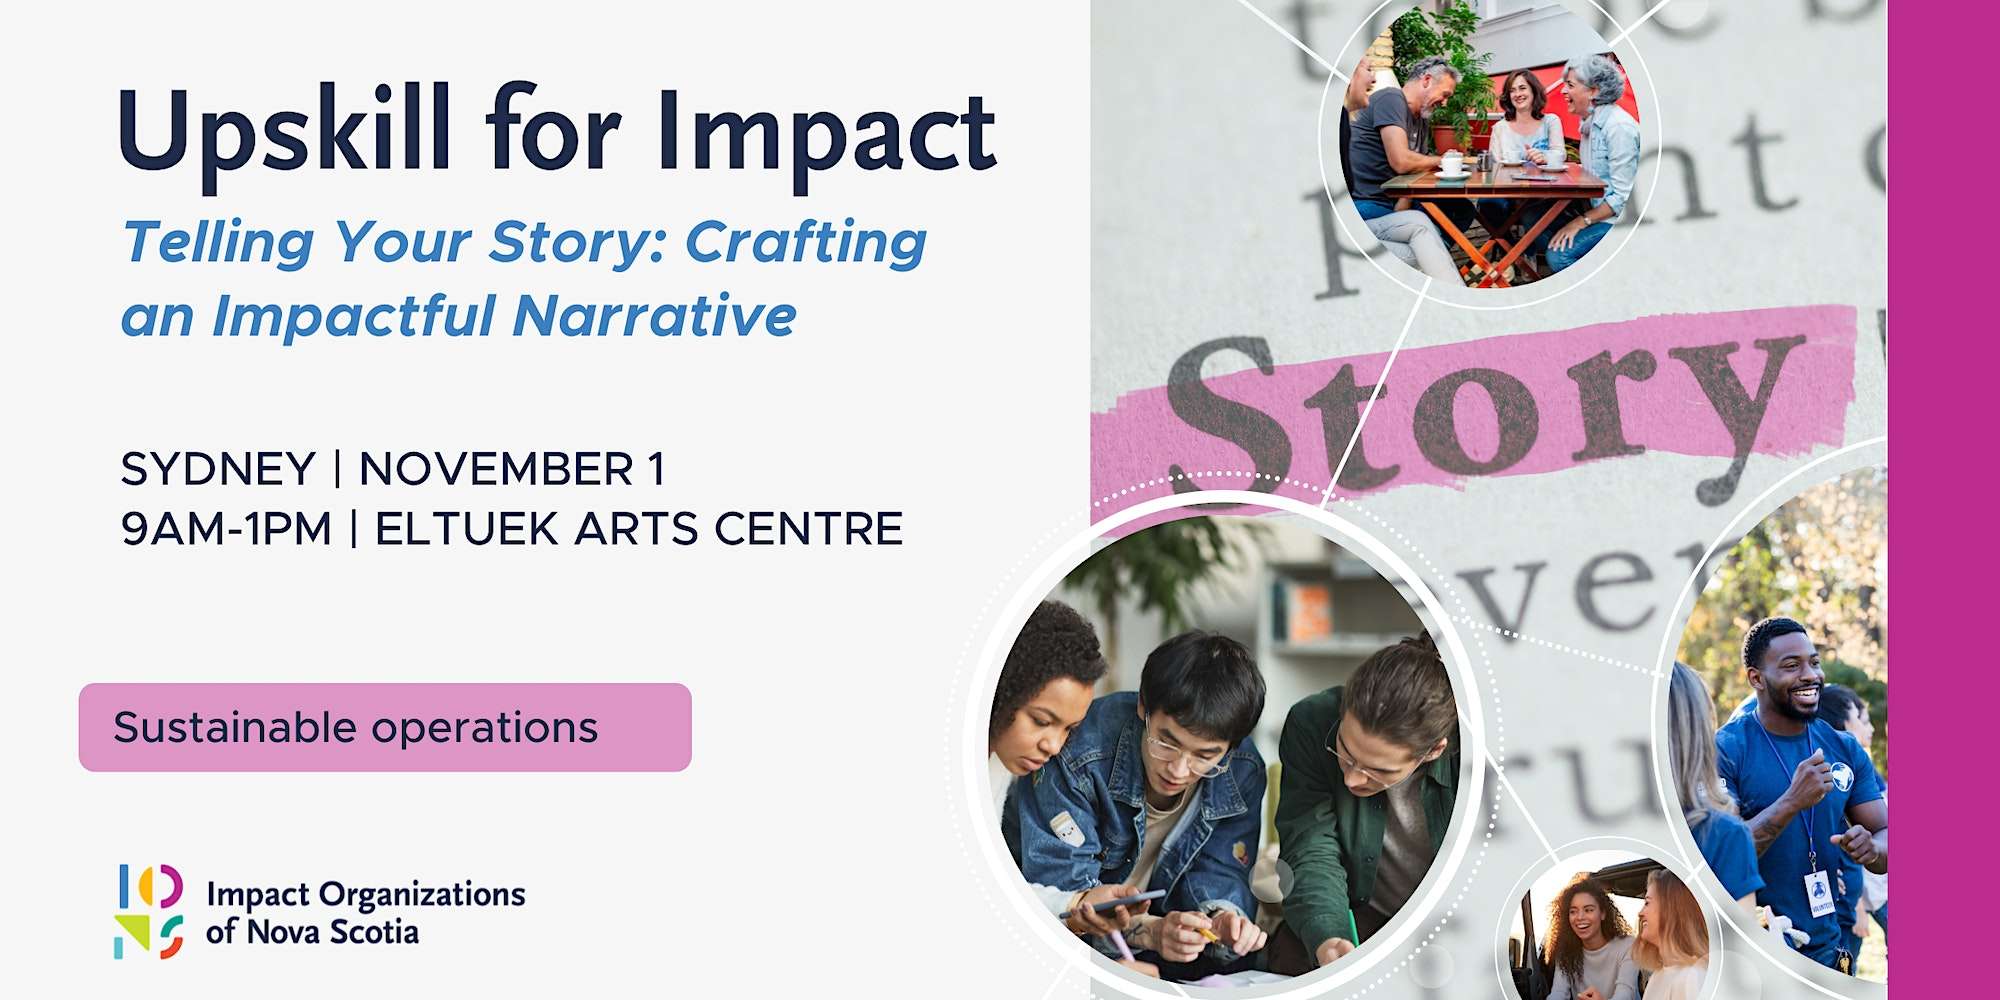 what makes a narrative/story effective impactful or engaging